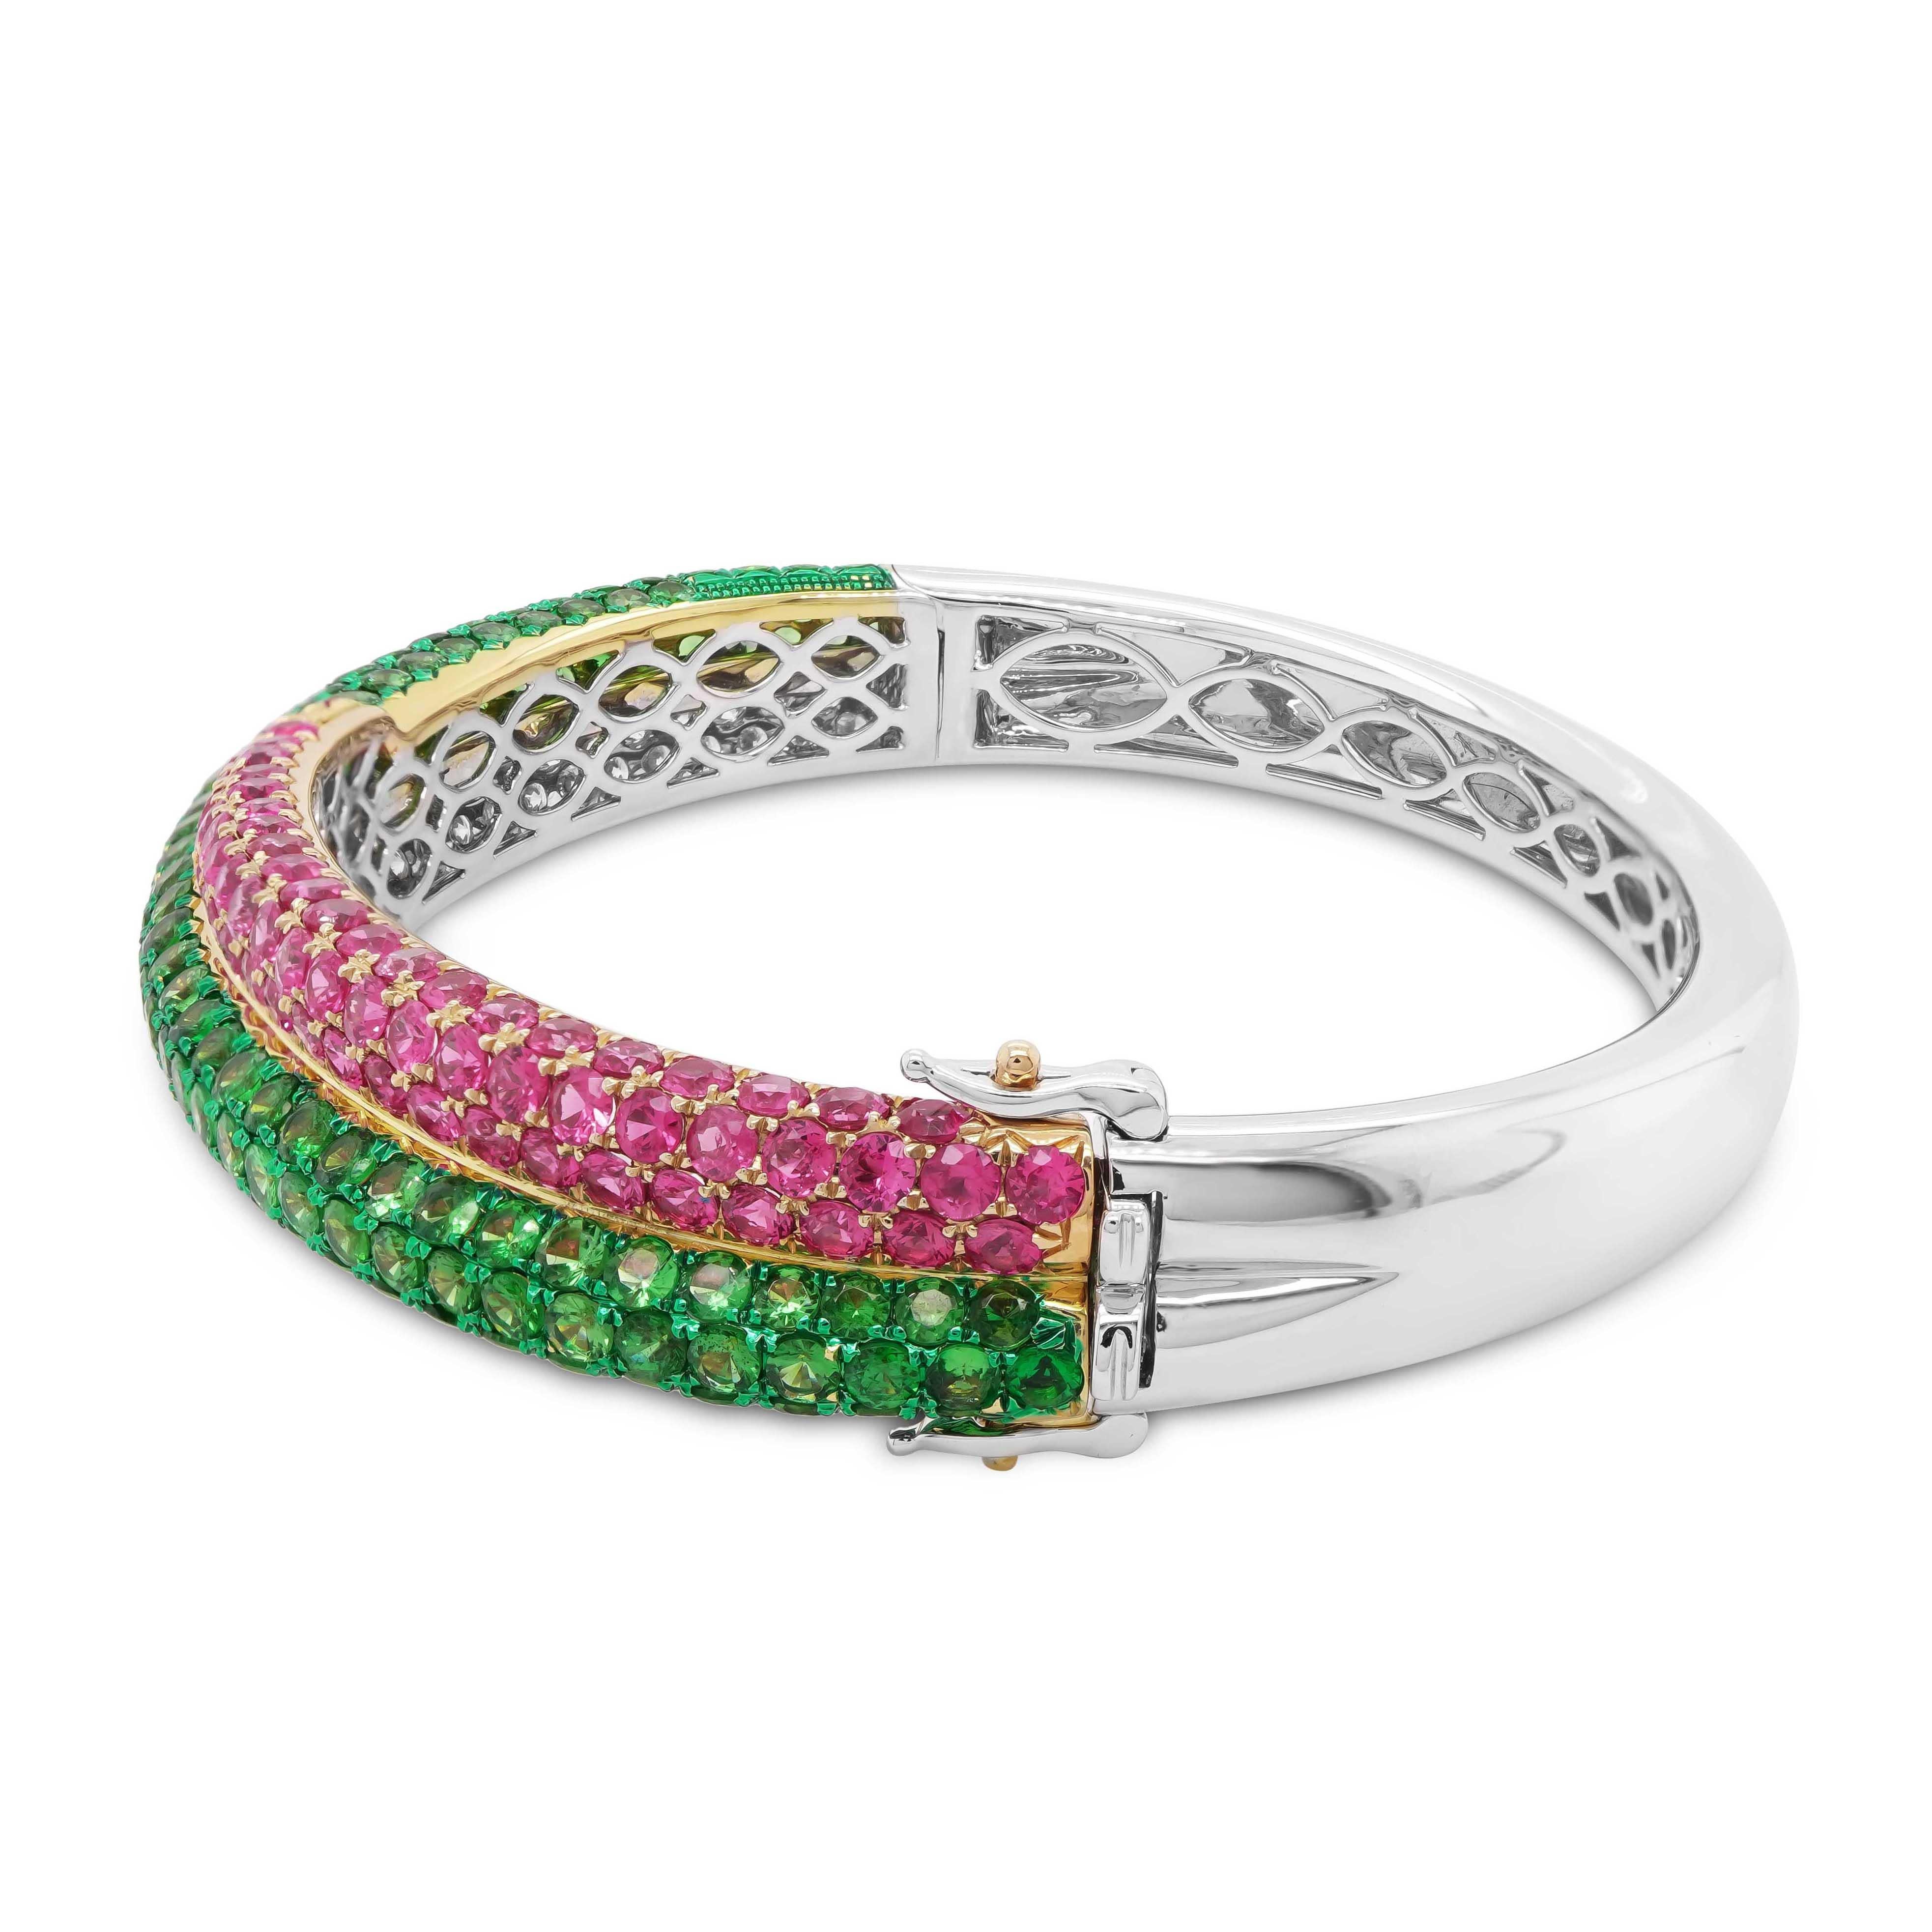  A green and pink bangle set with two bands, one comprising of Tsavorites handpicked from East Africa and the other with pink sapphires from Sri Lanka. A total of 6.17 carat of Tsavorite, 2.95 carat of pink sapphire and 2.36 carat of white diamond